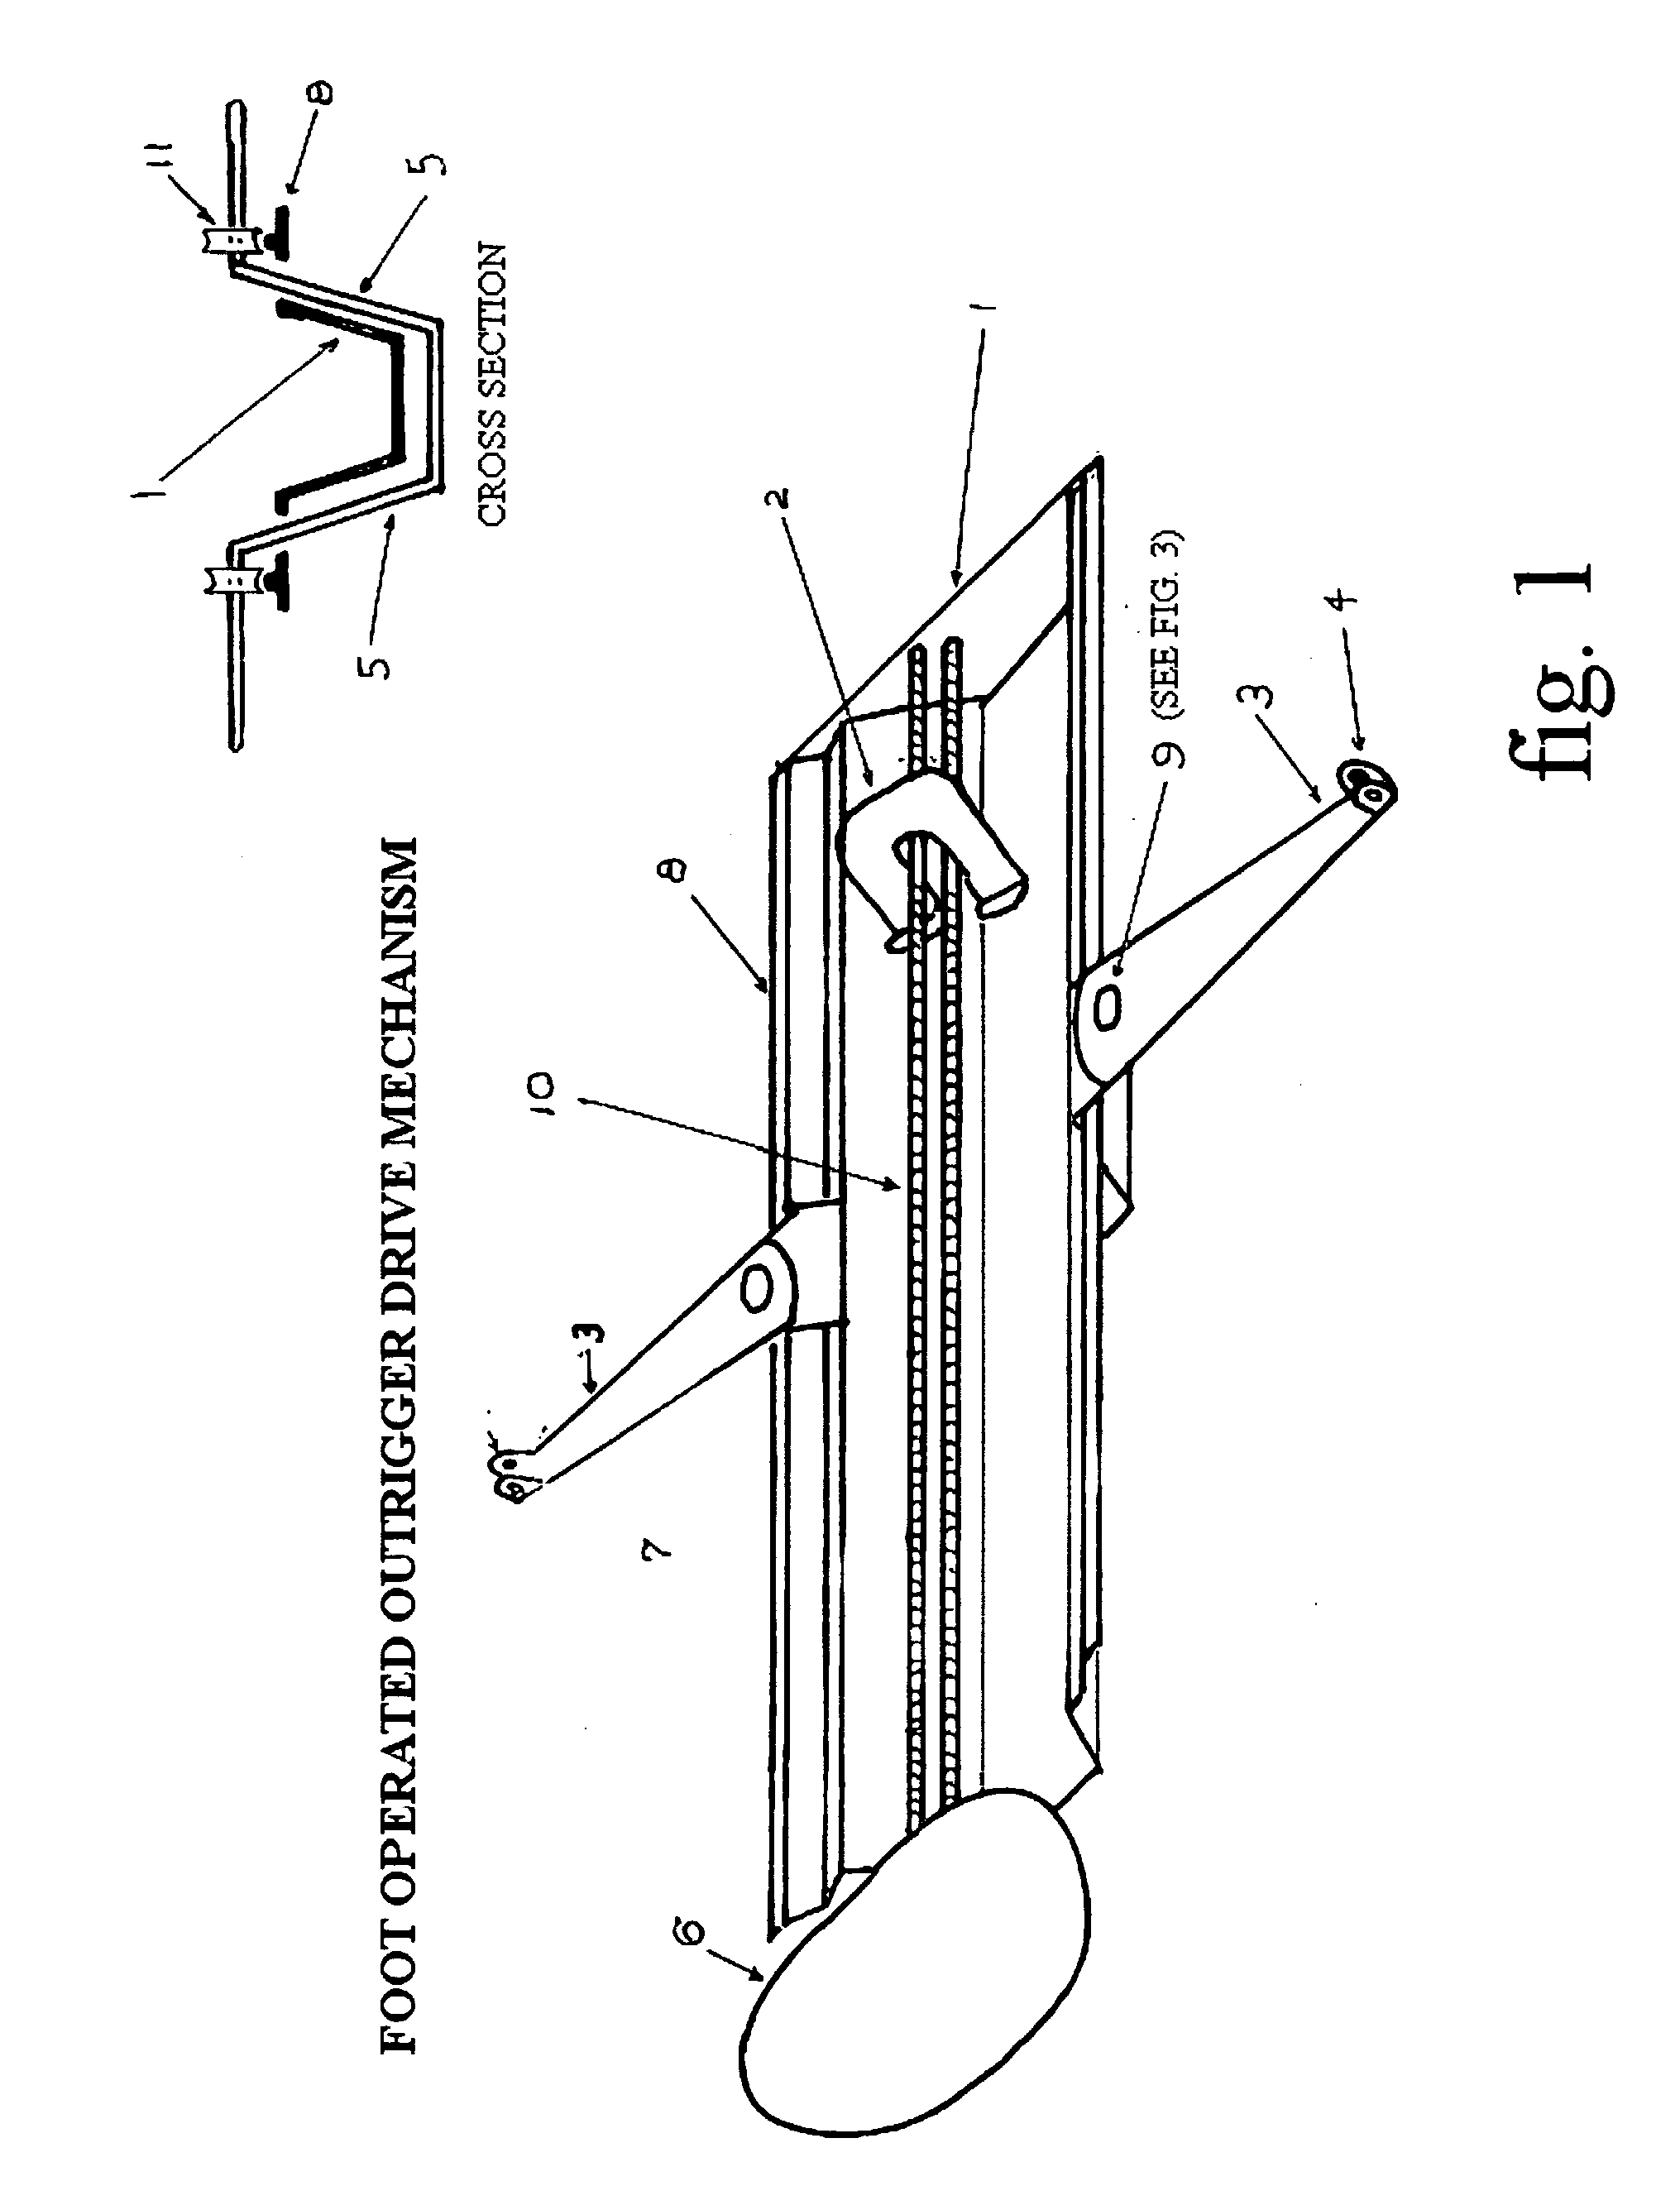 Bow-facing rowing system